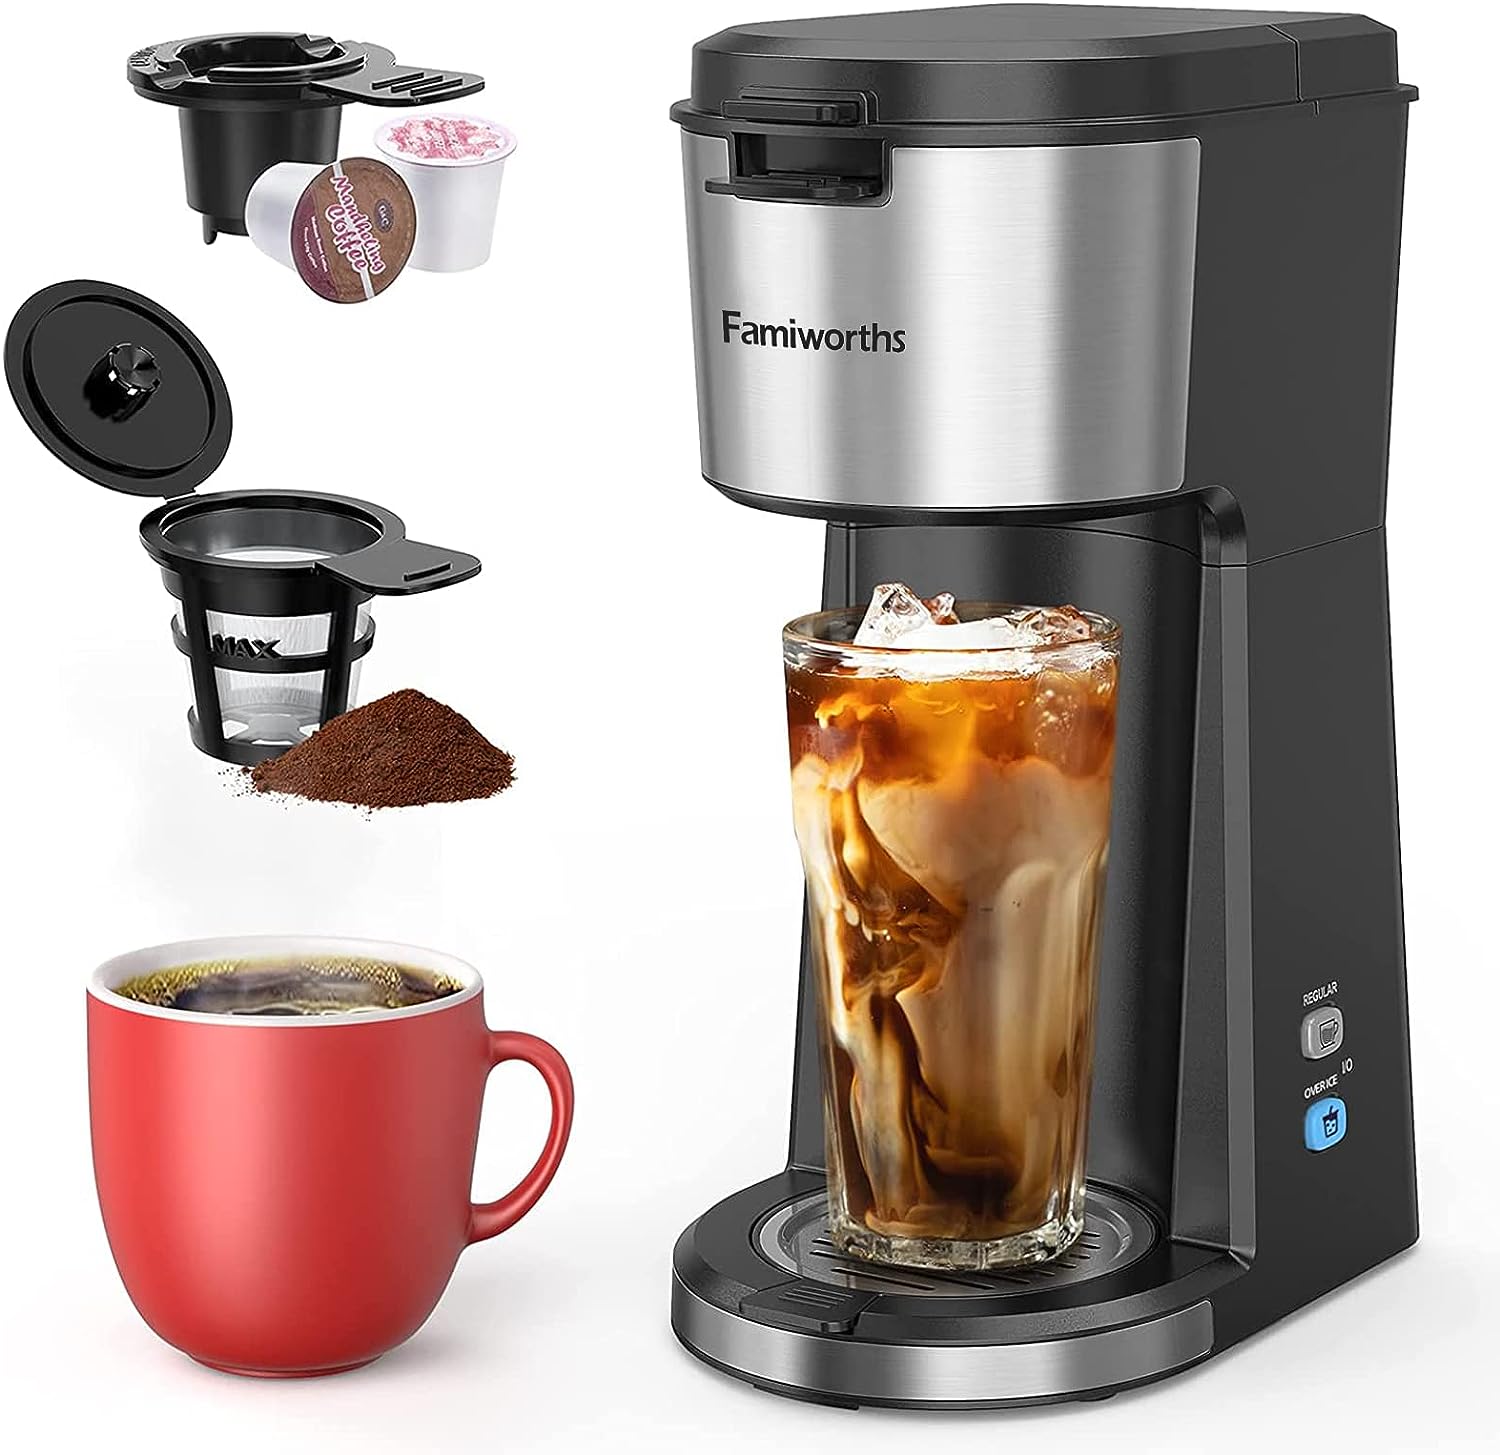 63a283ddc662ad10de67cb72 famiworths iced coffee maker hot and